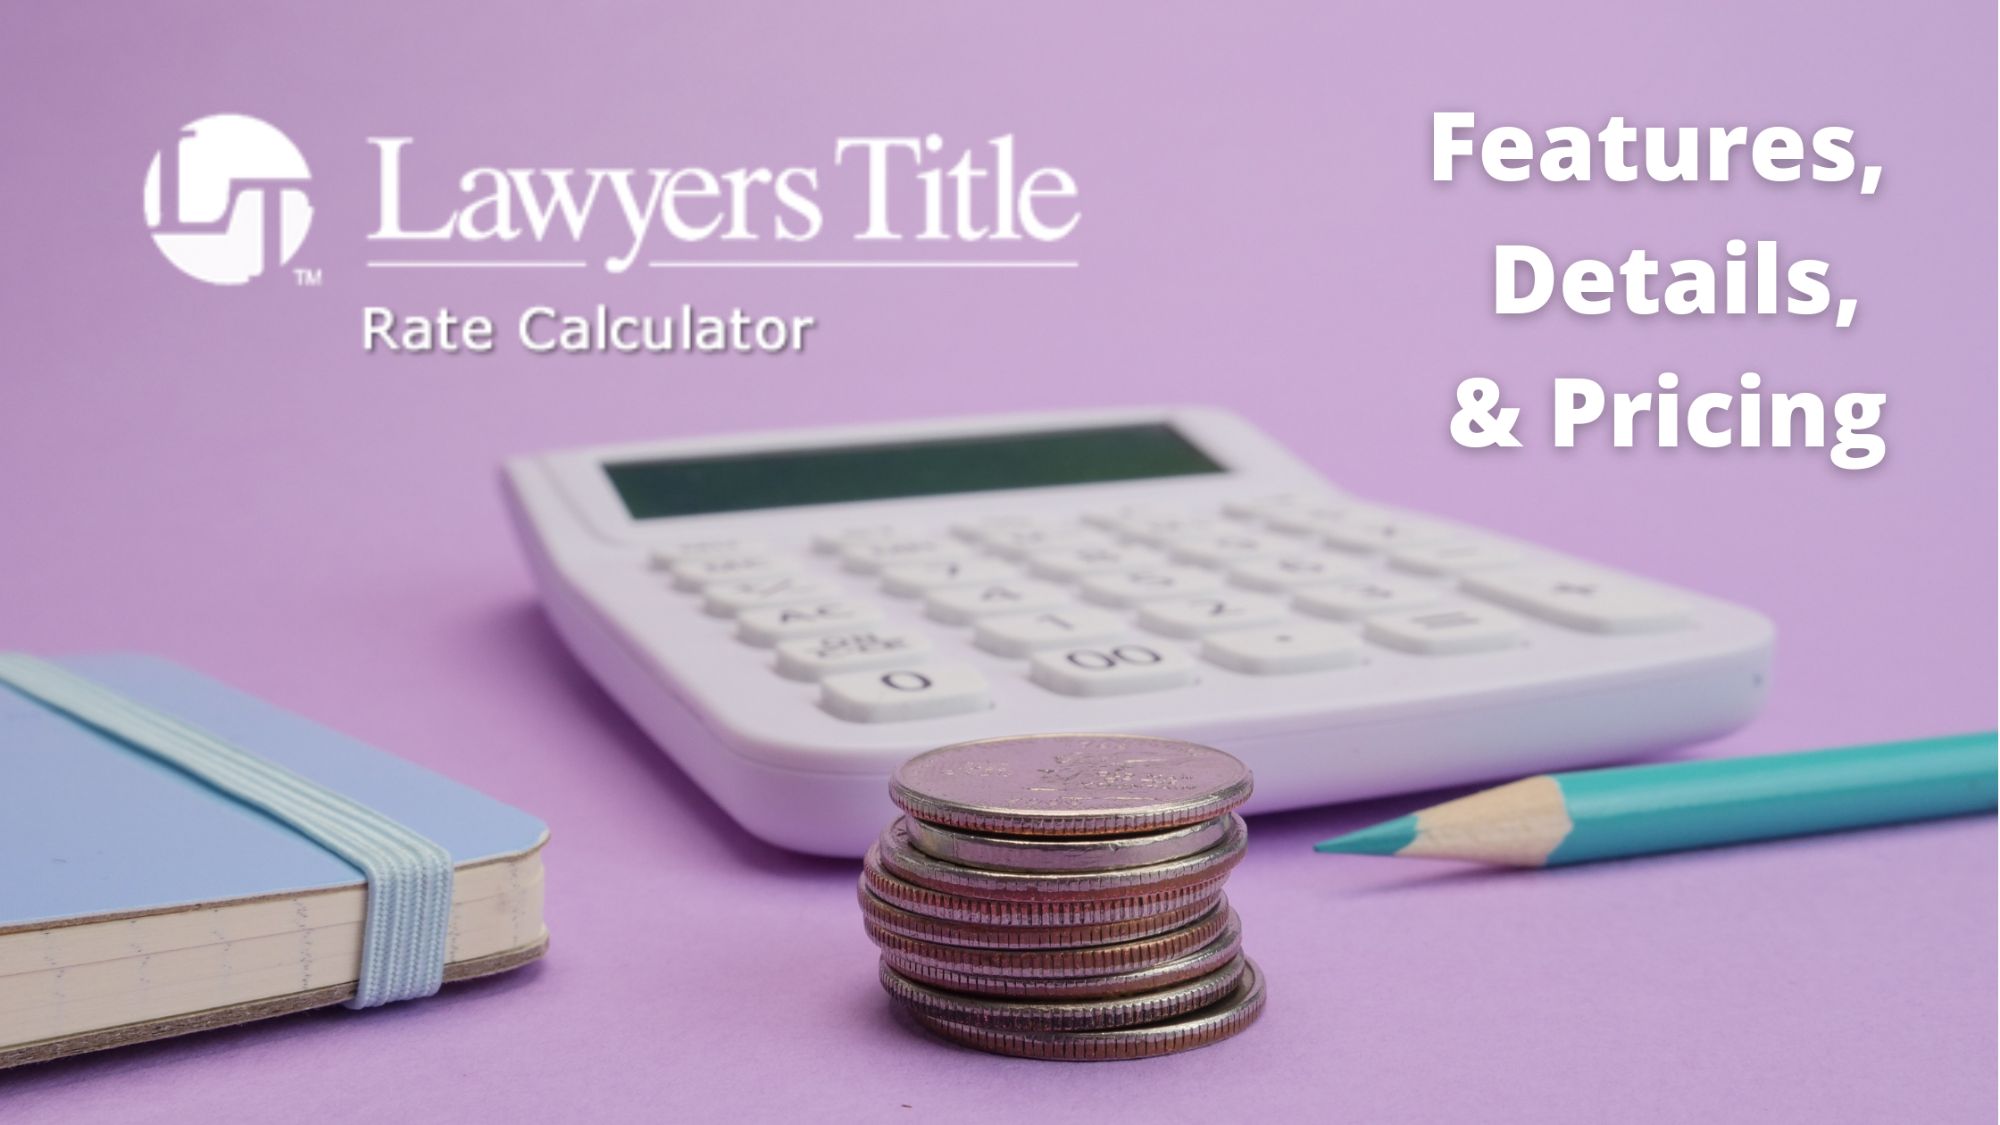 Lawyer’s Title Rate Calculator Features, Details, & Pricing Seller